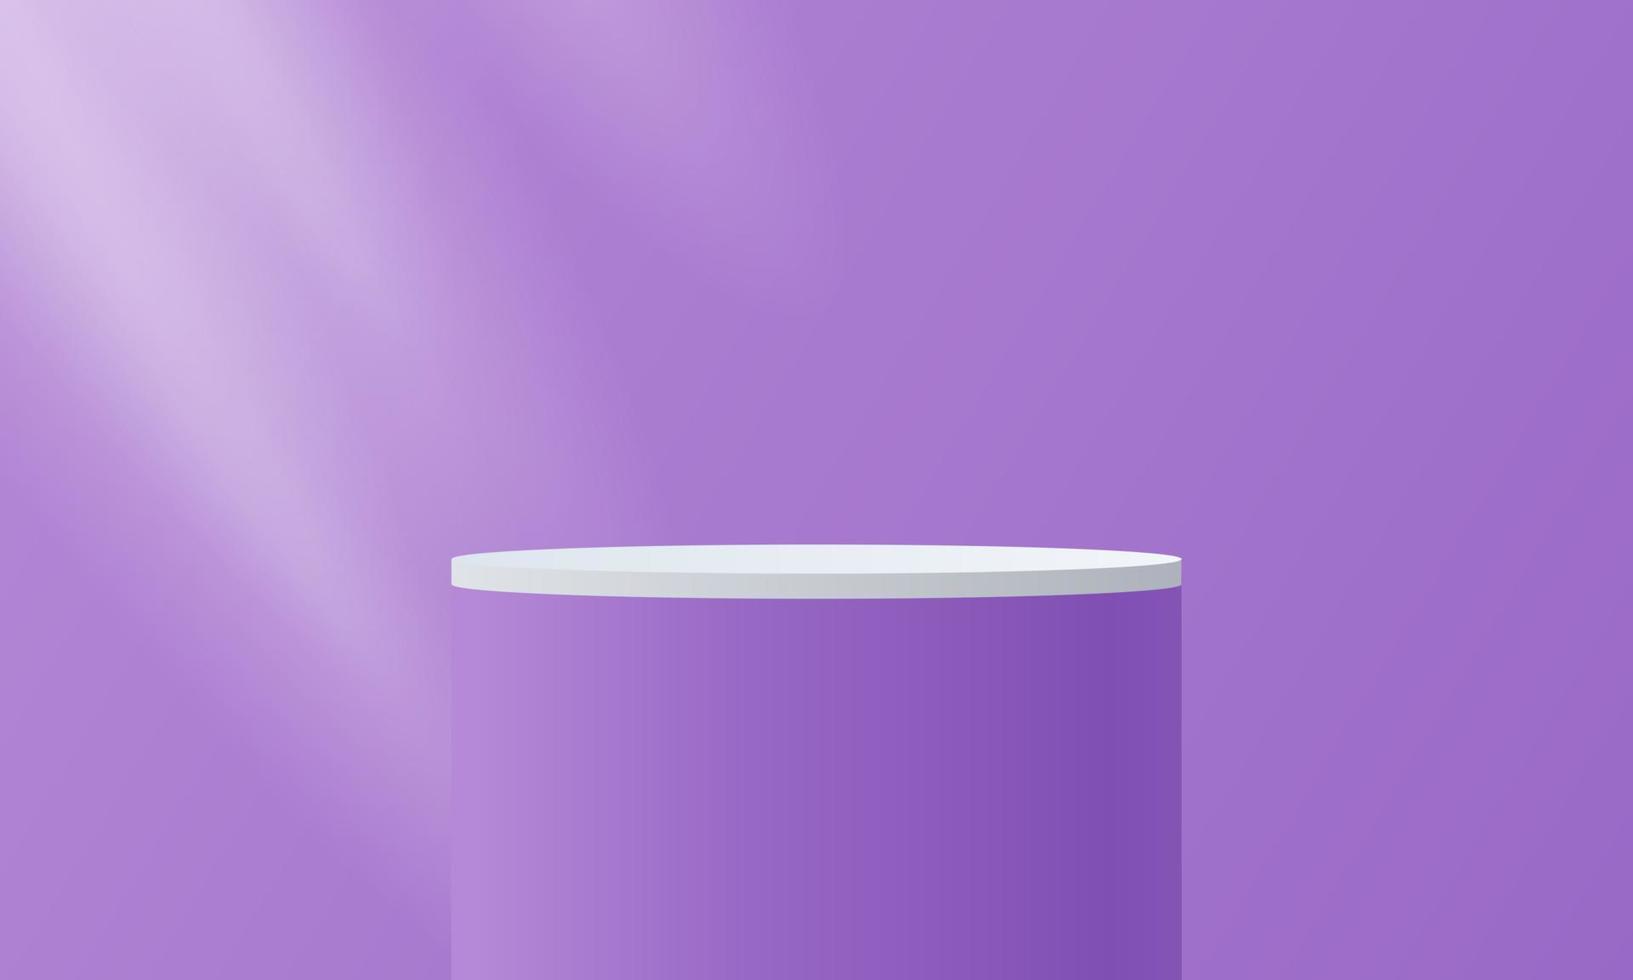 3d background products display podium. background vector 3d rendering with podium. stand to show cosmetic product on podium 3d. Stage showcase on pedestal display purple  background studio